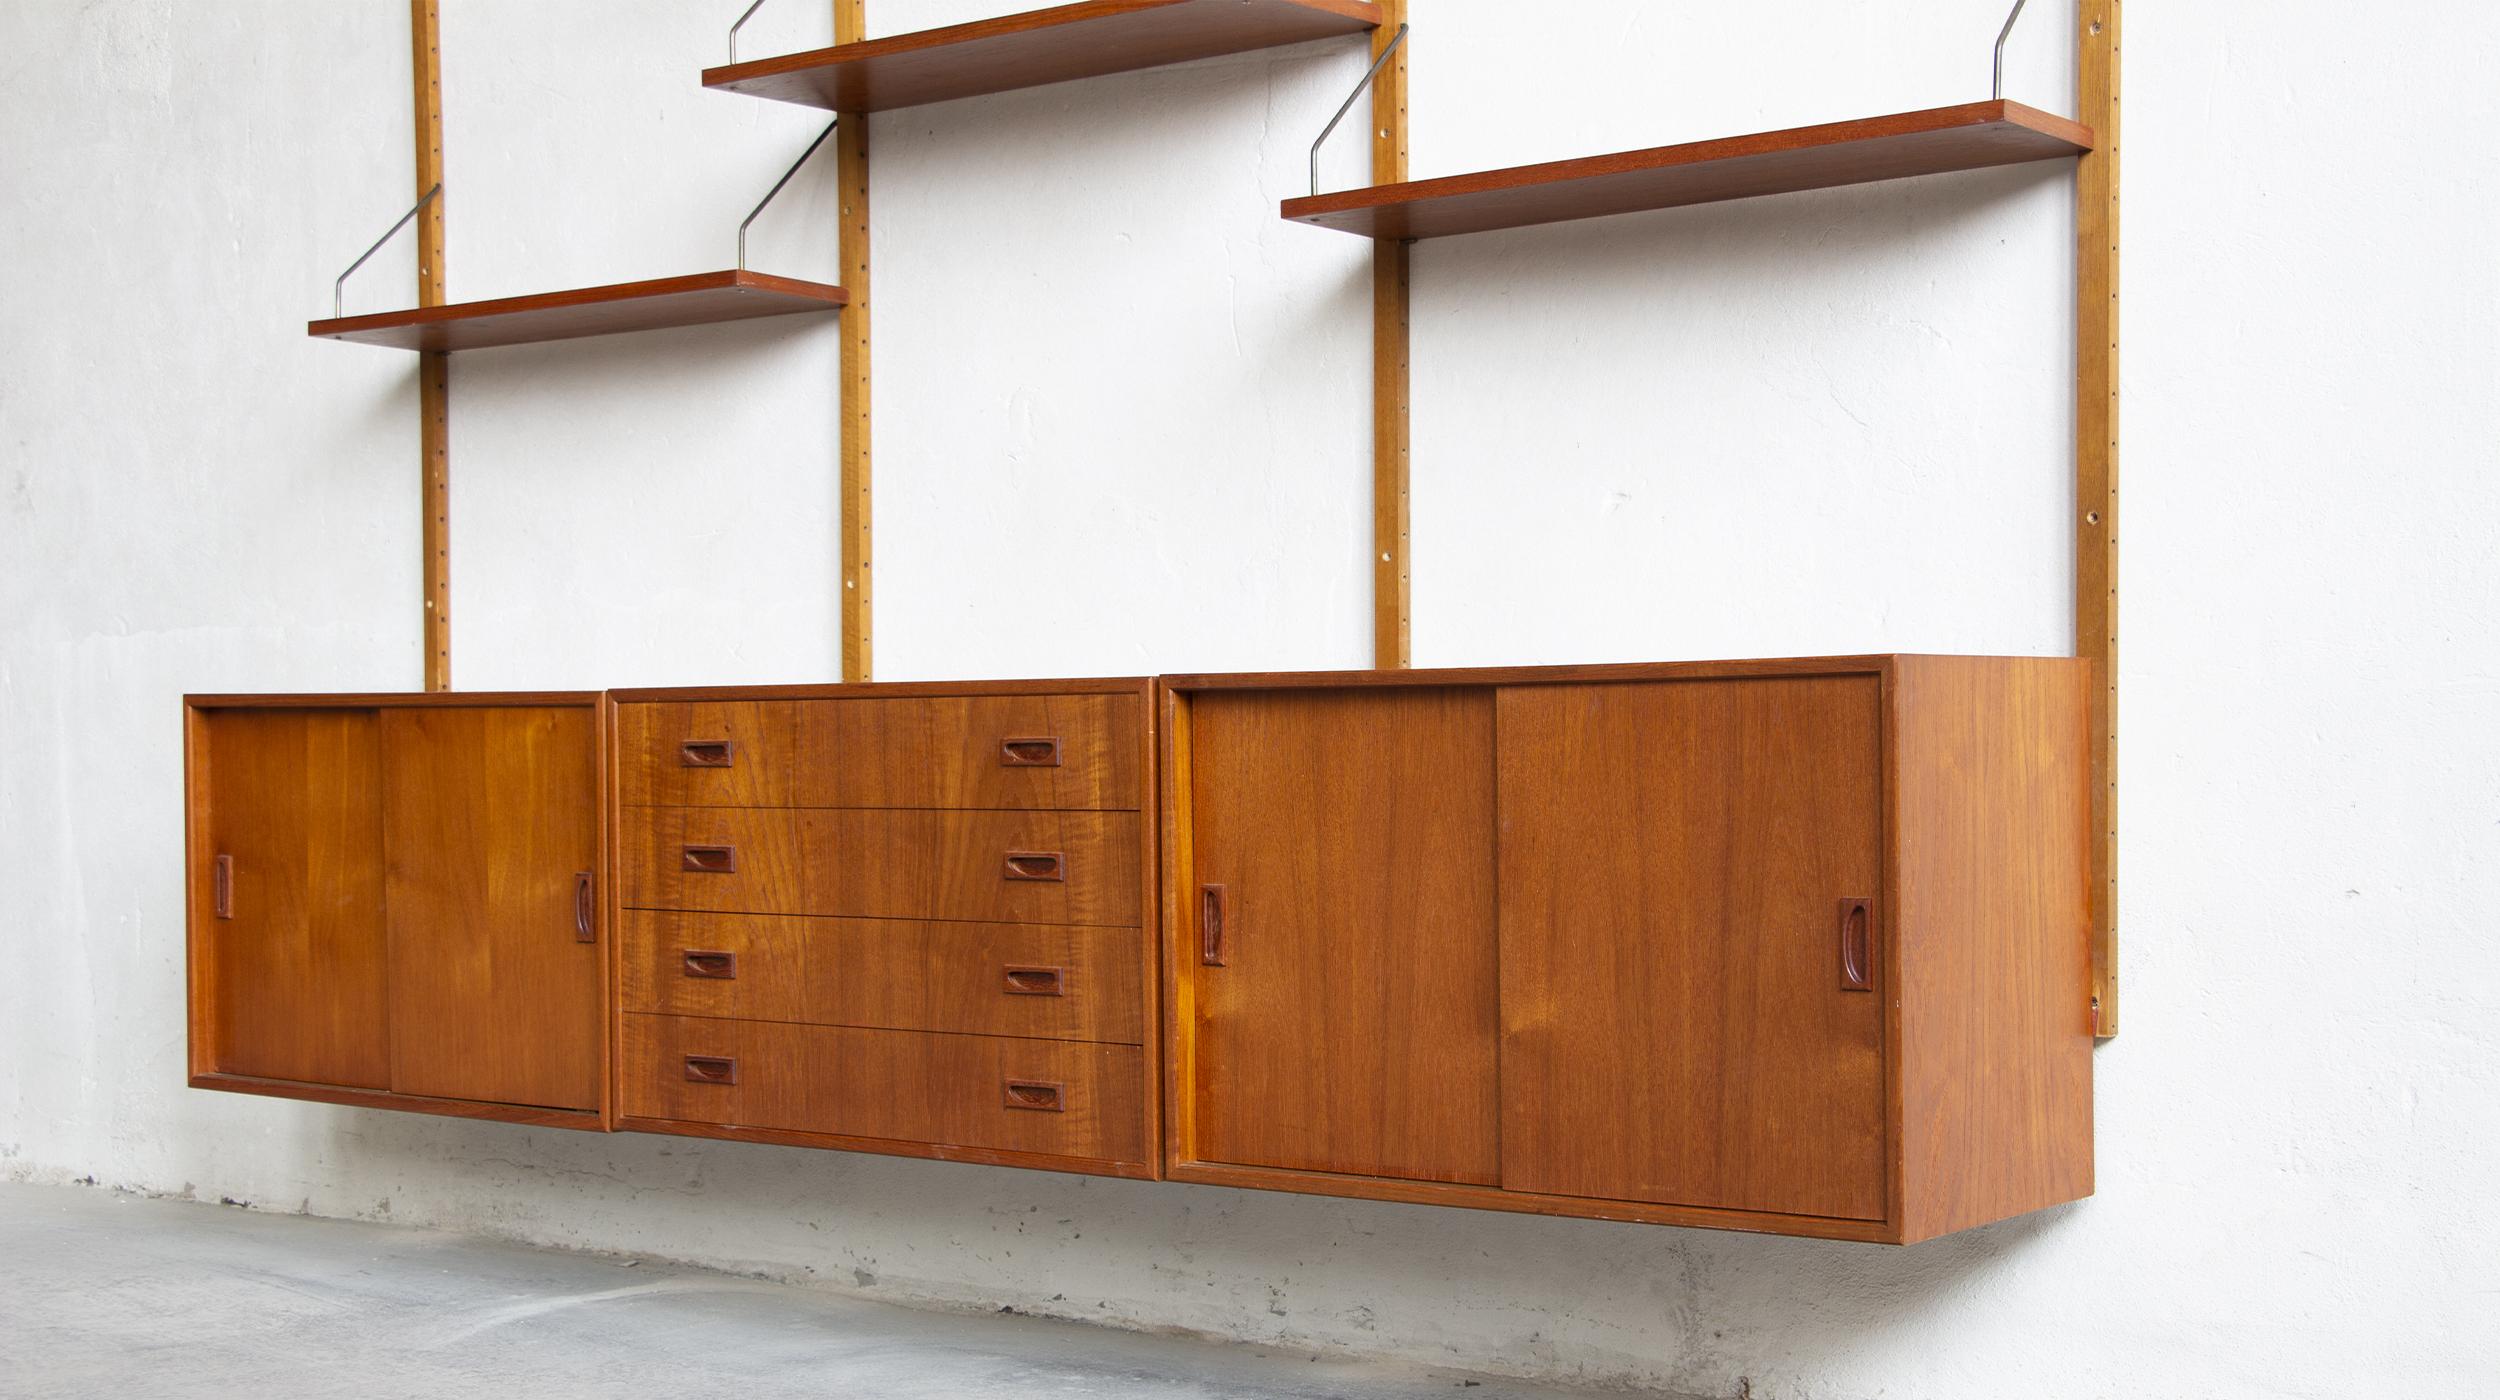 Danish vintage teak bookcase Preben Sørensen for Randers Møbelfabrik.

Model PS System.

The set is in very good vintage condition. The bookcase is in very good vintage condition with age-related wear and tear.

This modular bookcase is composed of